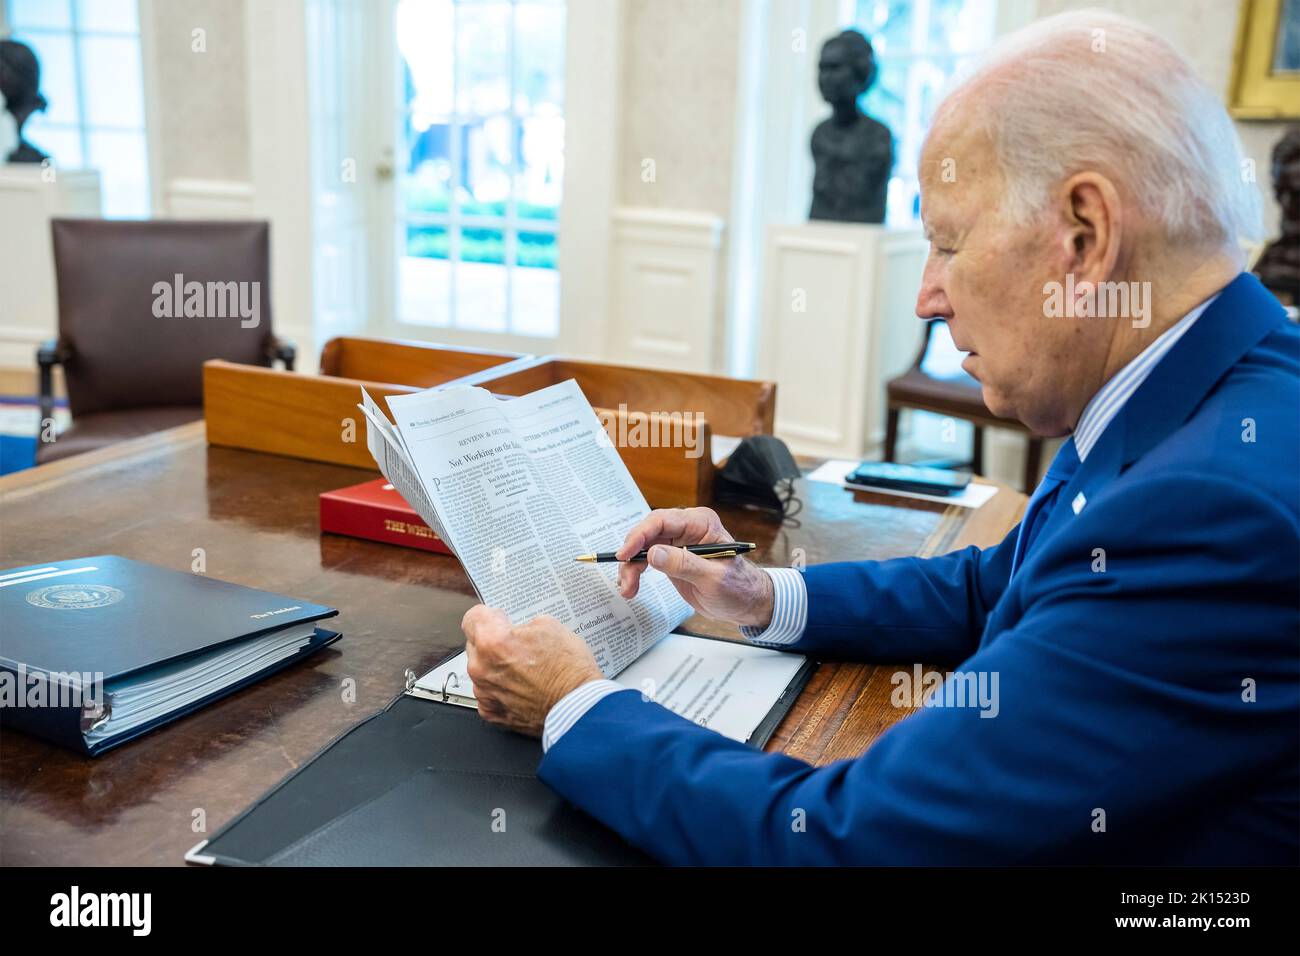 Washington, United States Of America. 15th Sep, 2022. Washington, United States of America. 15 September, 2022. U.S President Joe Biden, reads an editorial commentary in the Wall Street Journal on the railroad labor issues at the Oval Office of the White House, September 15, 2022 in Washington, DC After last minute intervention Biden helped avoid a strike by labor unions over work conditions. Credit: Adam Schultz/White House Photo/Alamy Live News Stock Photo